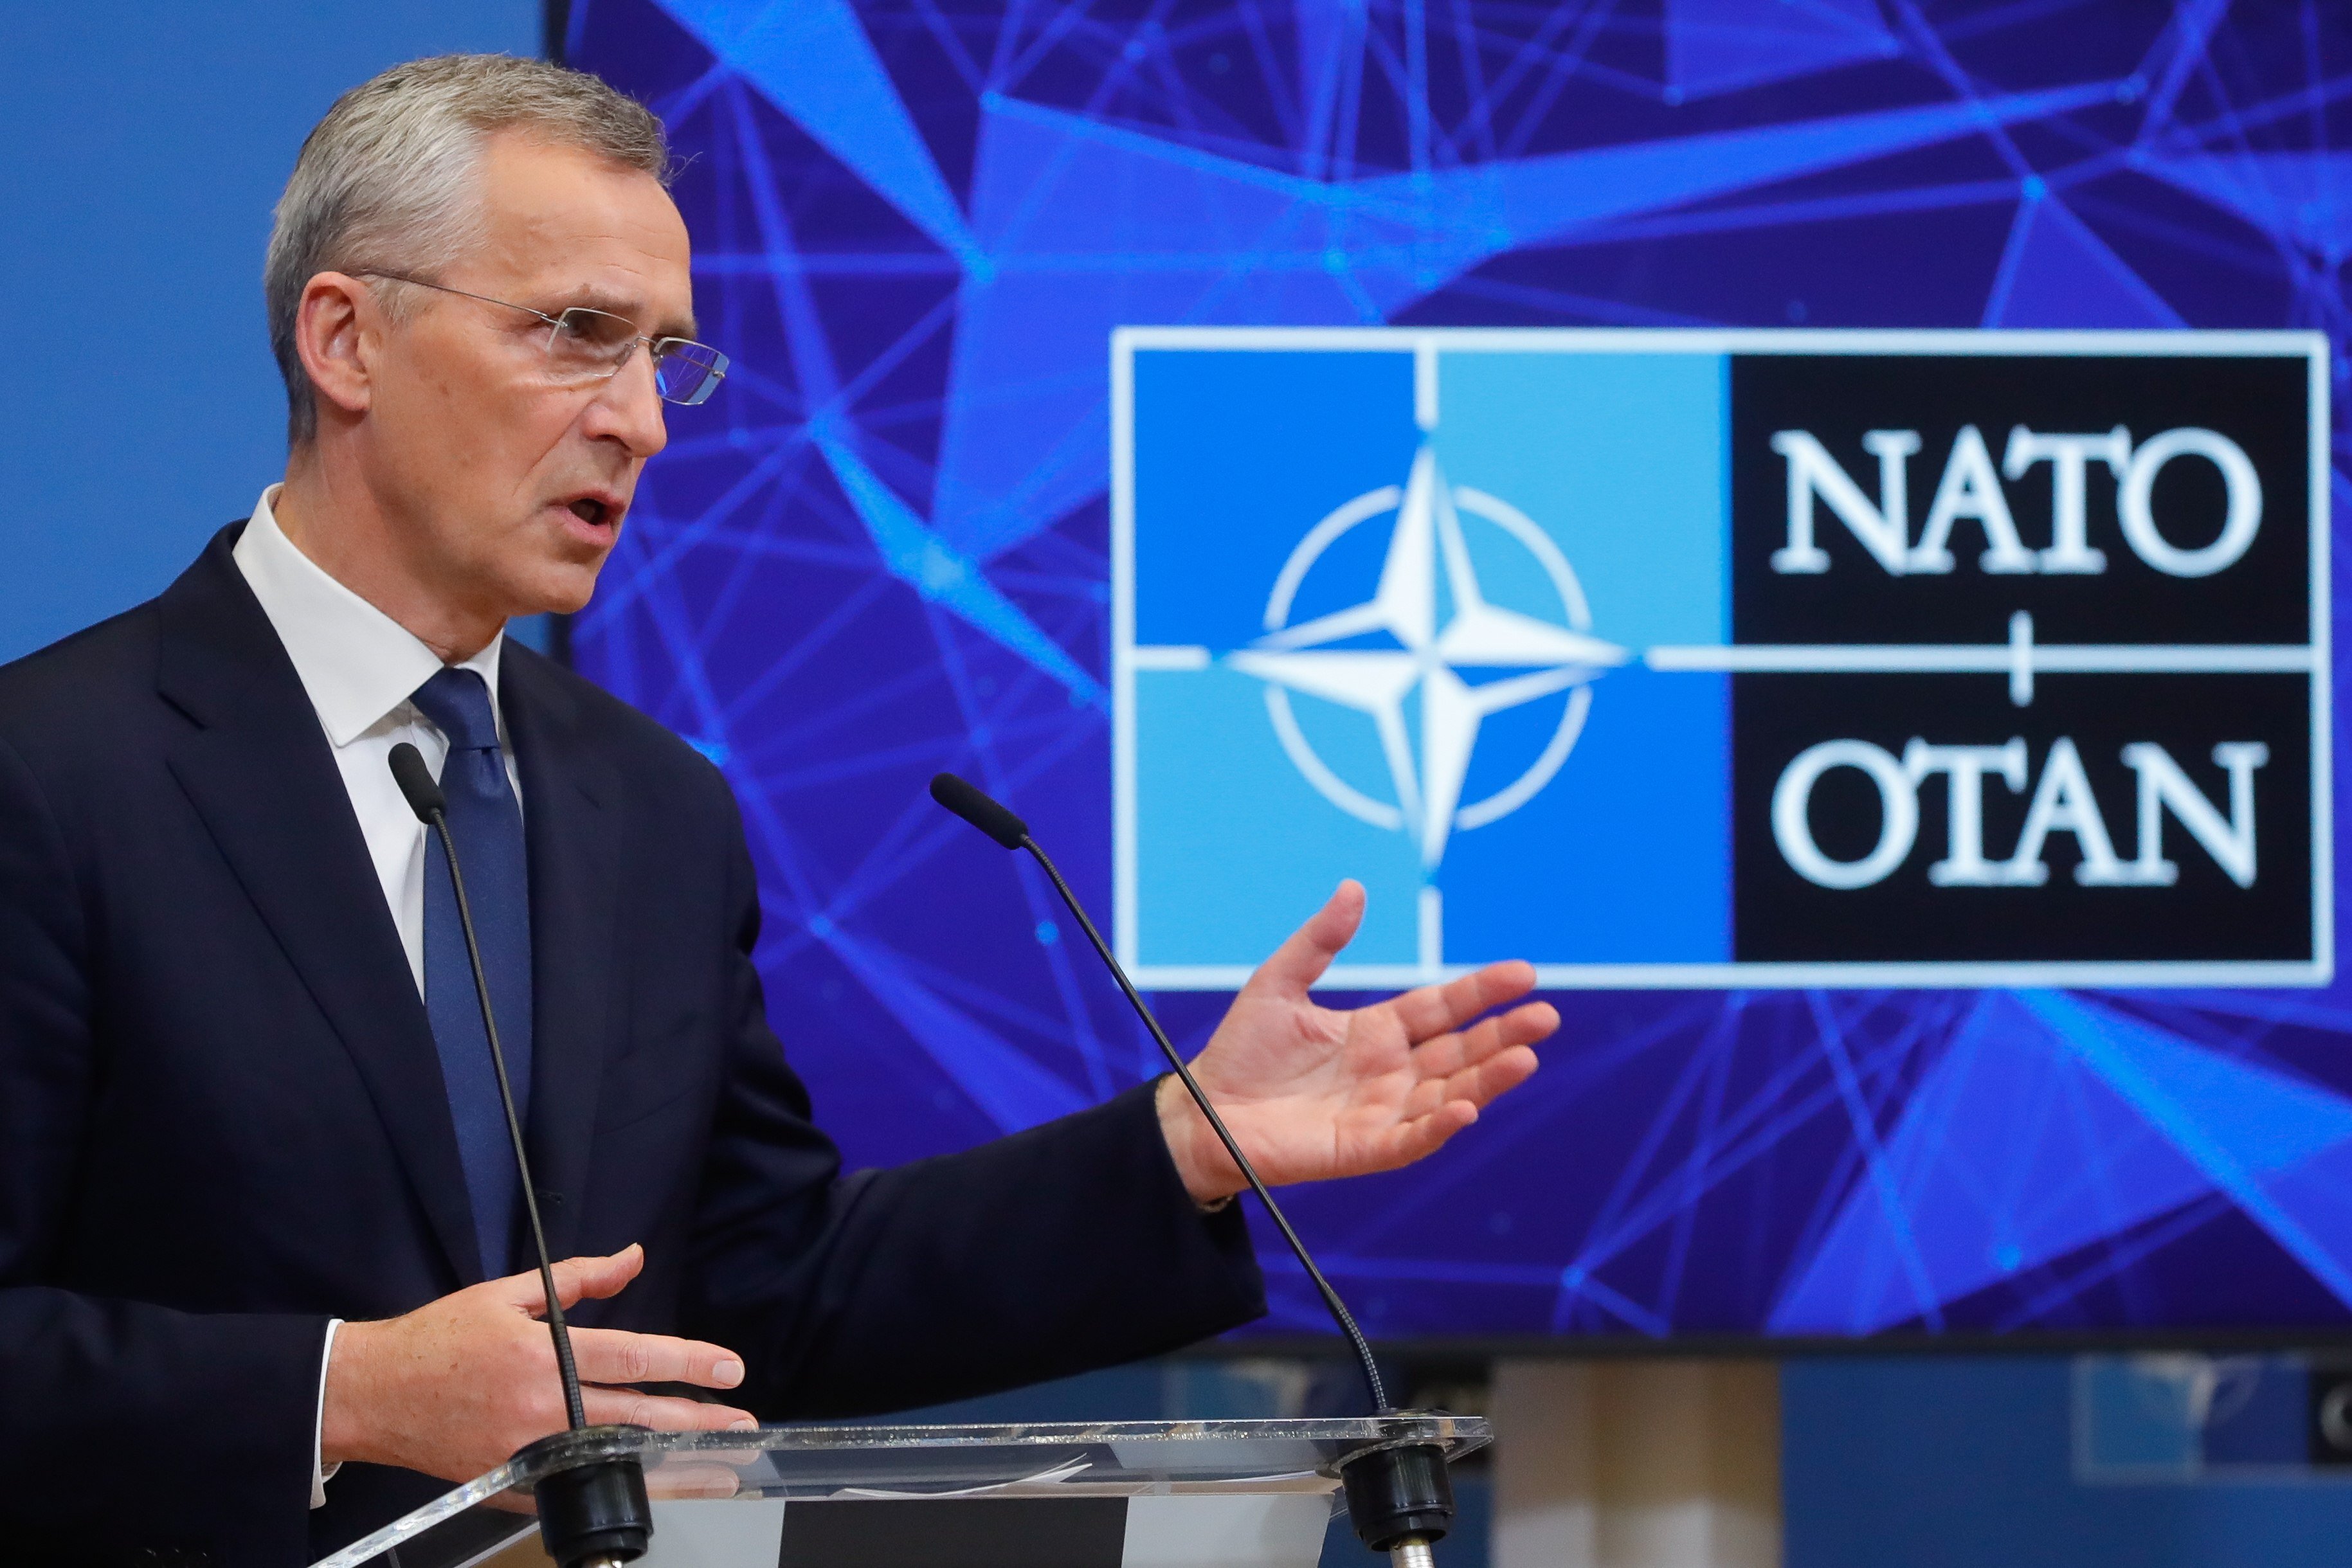 Nato Secretary General Jens Stoltenberg speaks to the press following a meeting of Nato foreign ministers in Brussels, Belgium, on April 7, to discuss how to bolster support for Ukraine without being drawn into a wider war with Russia. Photo: EPA-EFE